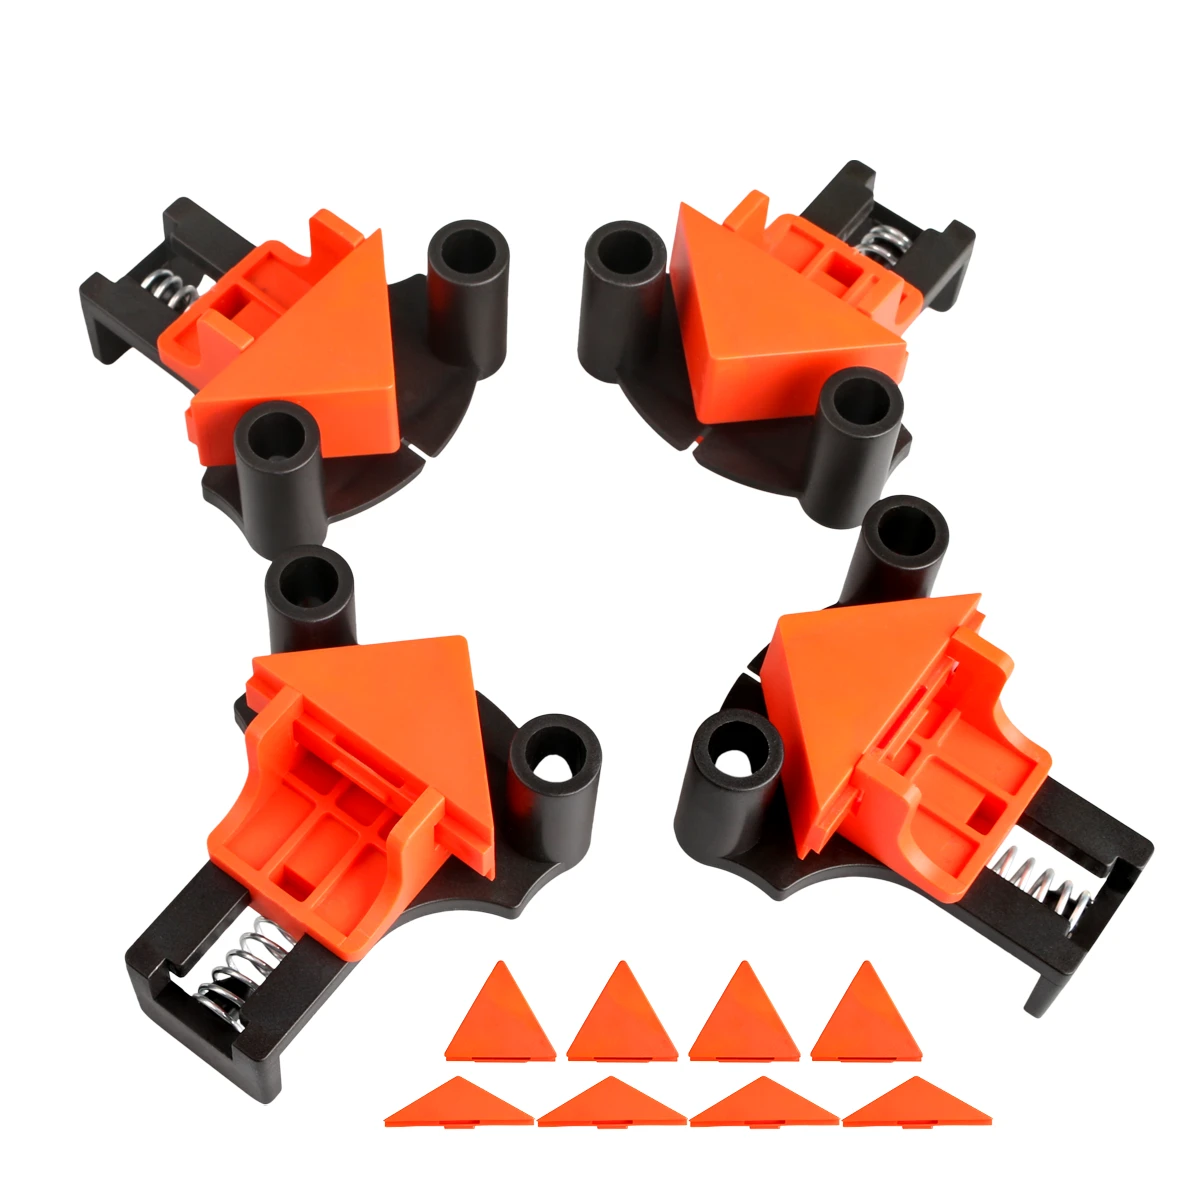 4 Pcs/set Carpenter Right Angle Clamp 60/90/120 Degrees Positioning Squares Corner Clamp for Welding Photo Framing Woodworking